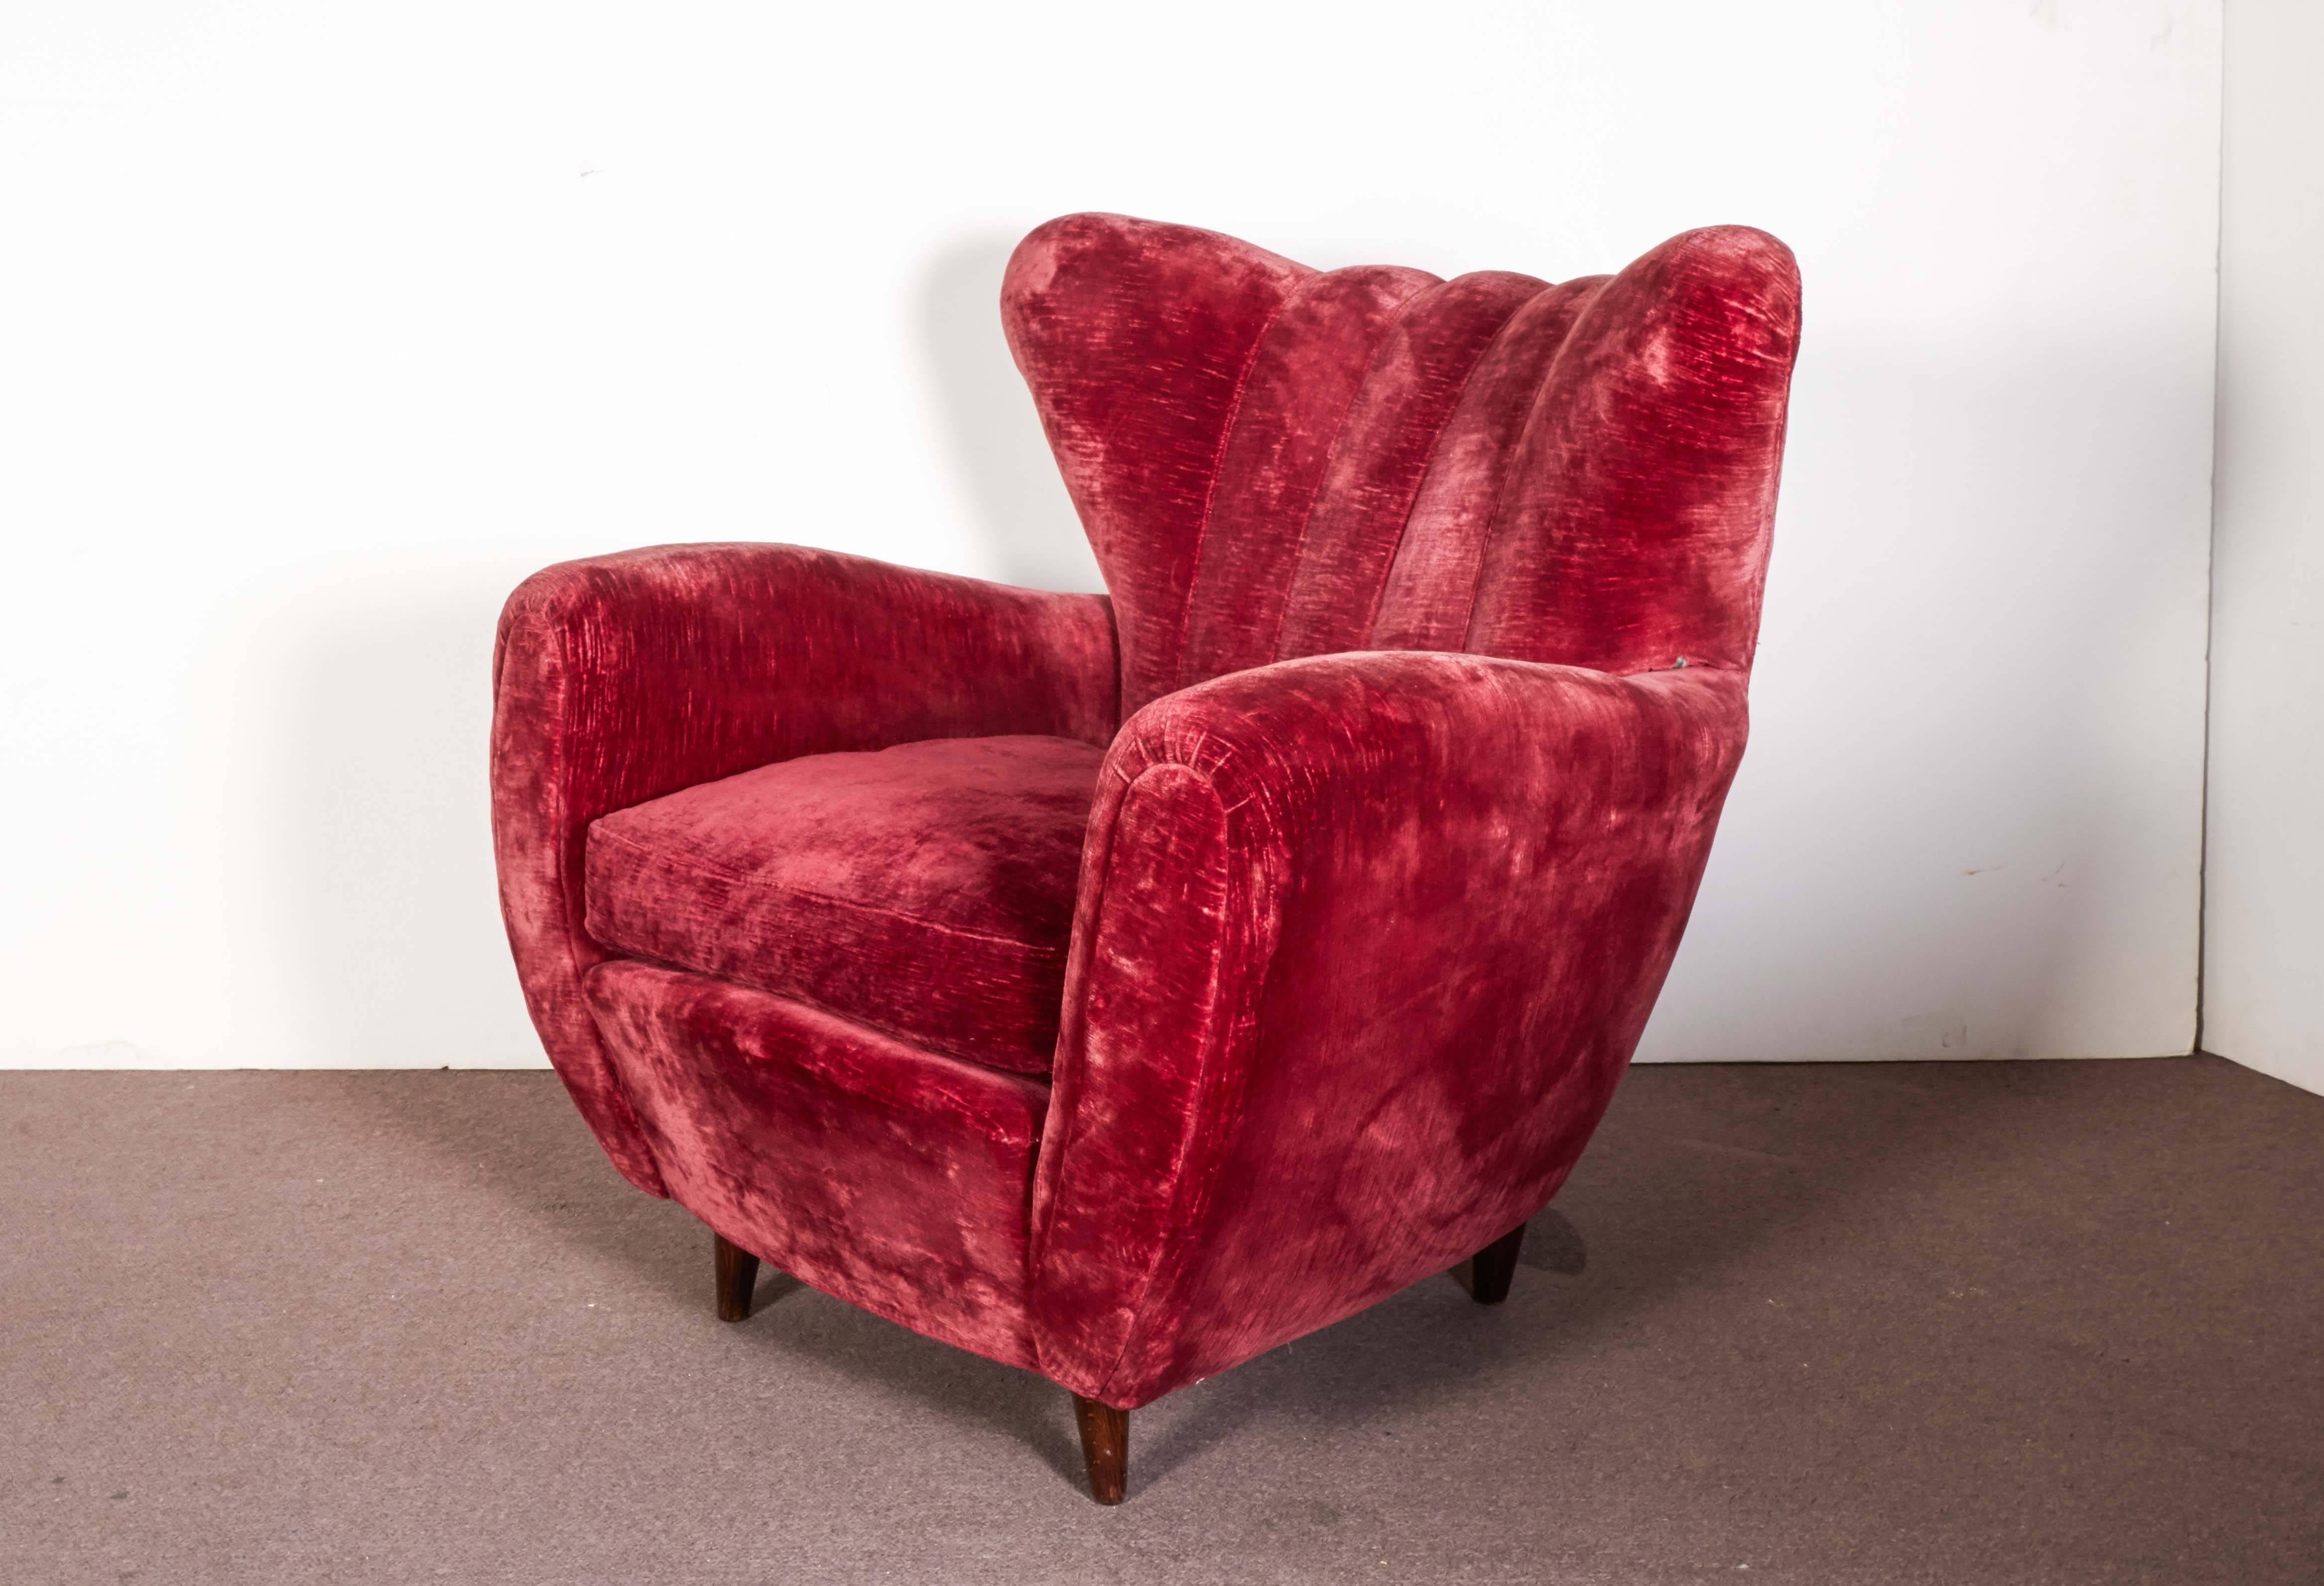 Pair of oversized and extremely comfortable chairs with winged backs in original magenta colored crushed velvet, attributed to Guglielmo Ulrich. The chairs feature a slightly barrel shaped anthropomorphic body with fluted backrest, flanked by